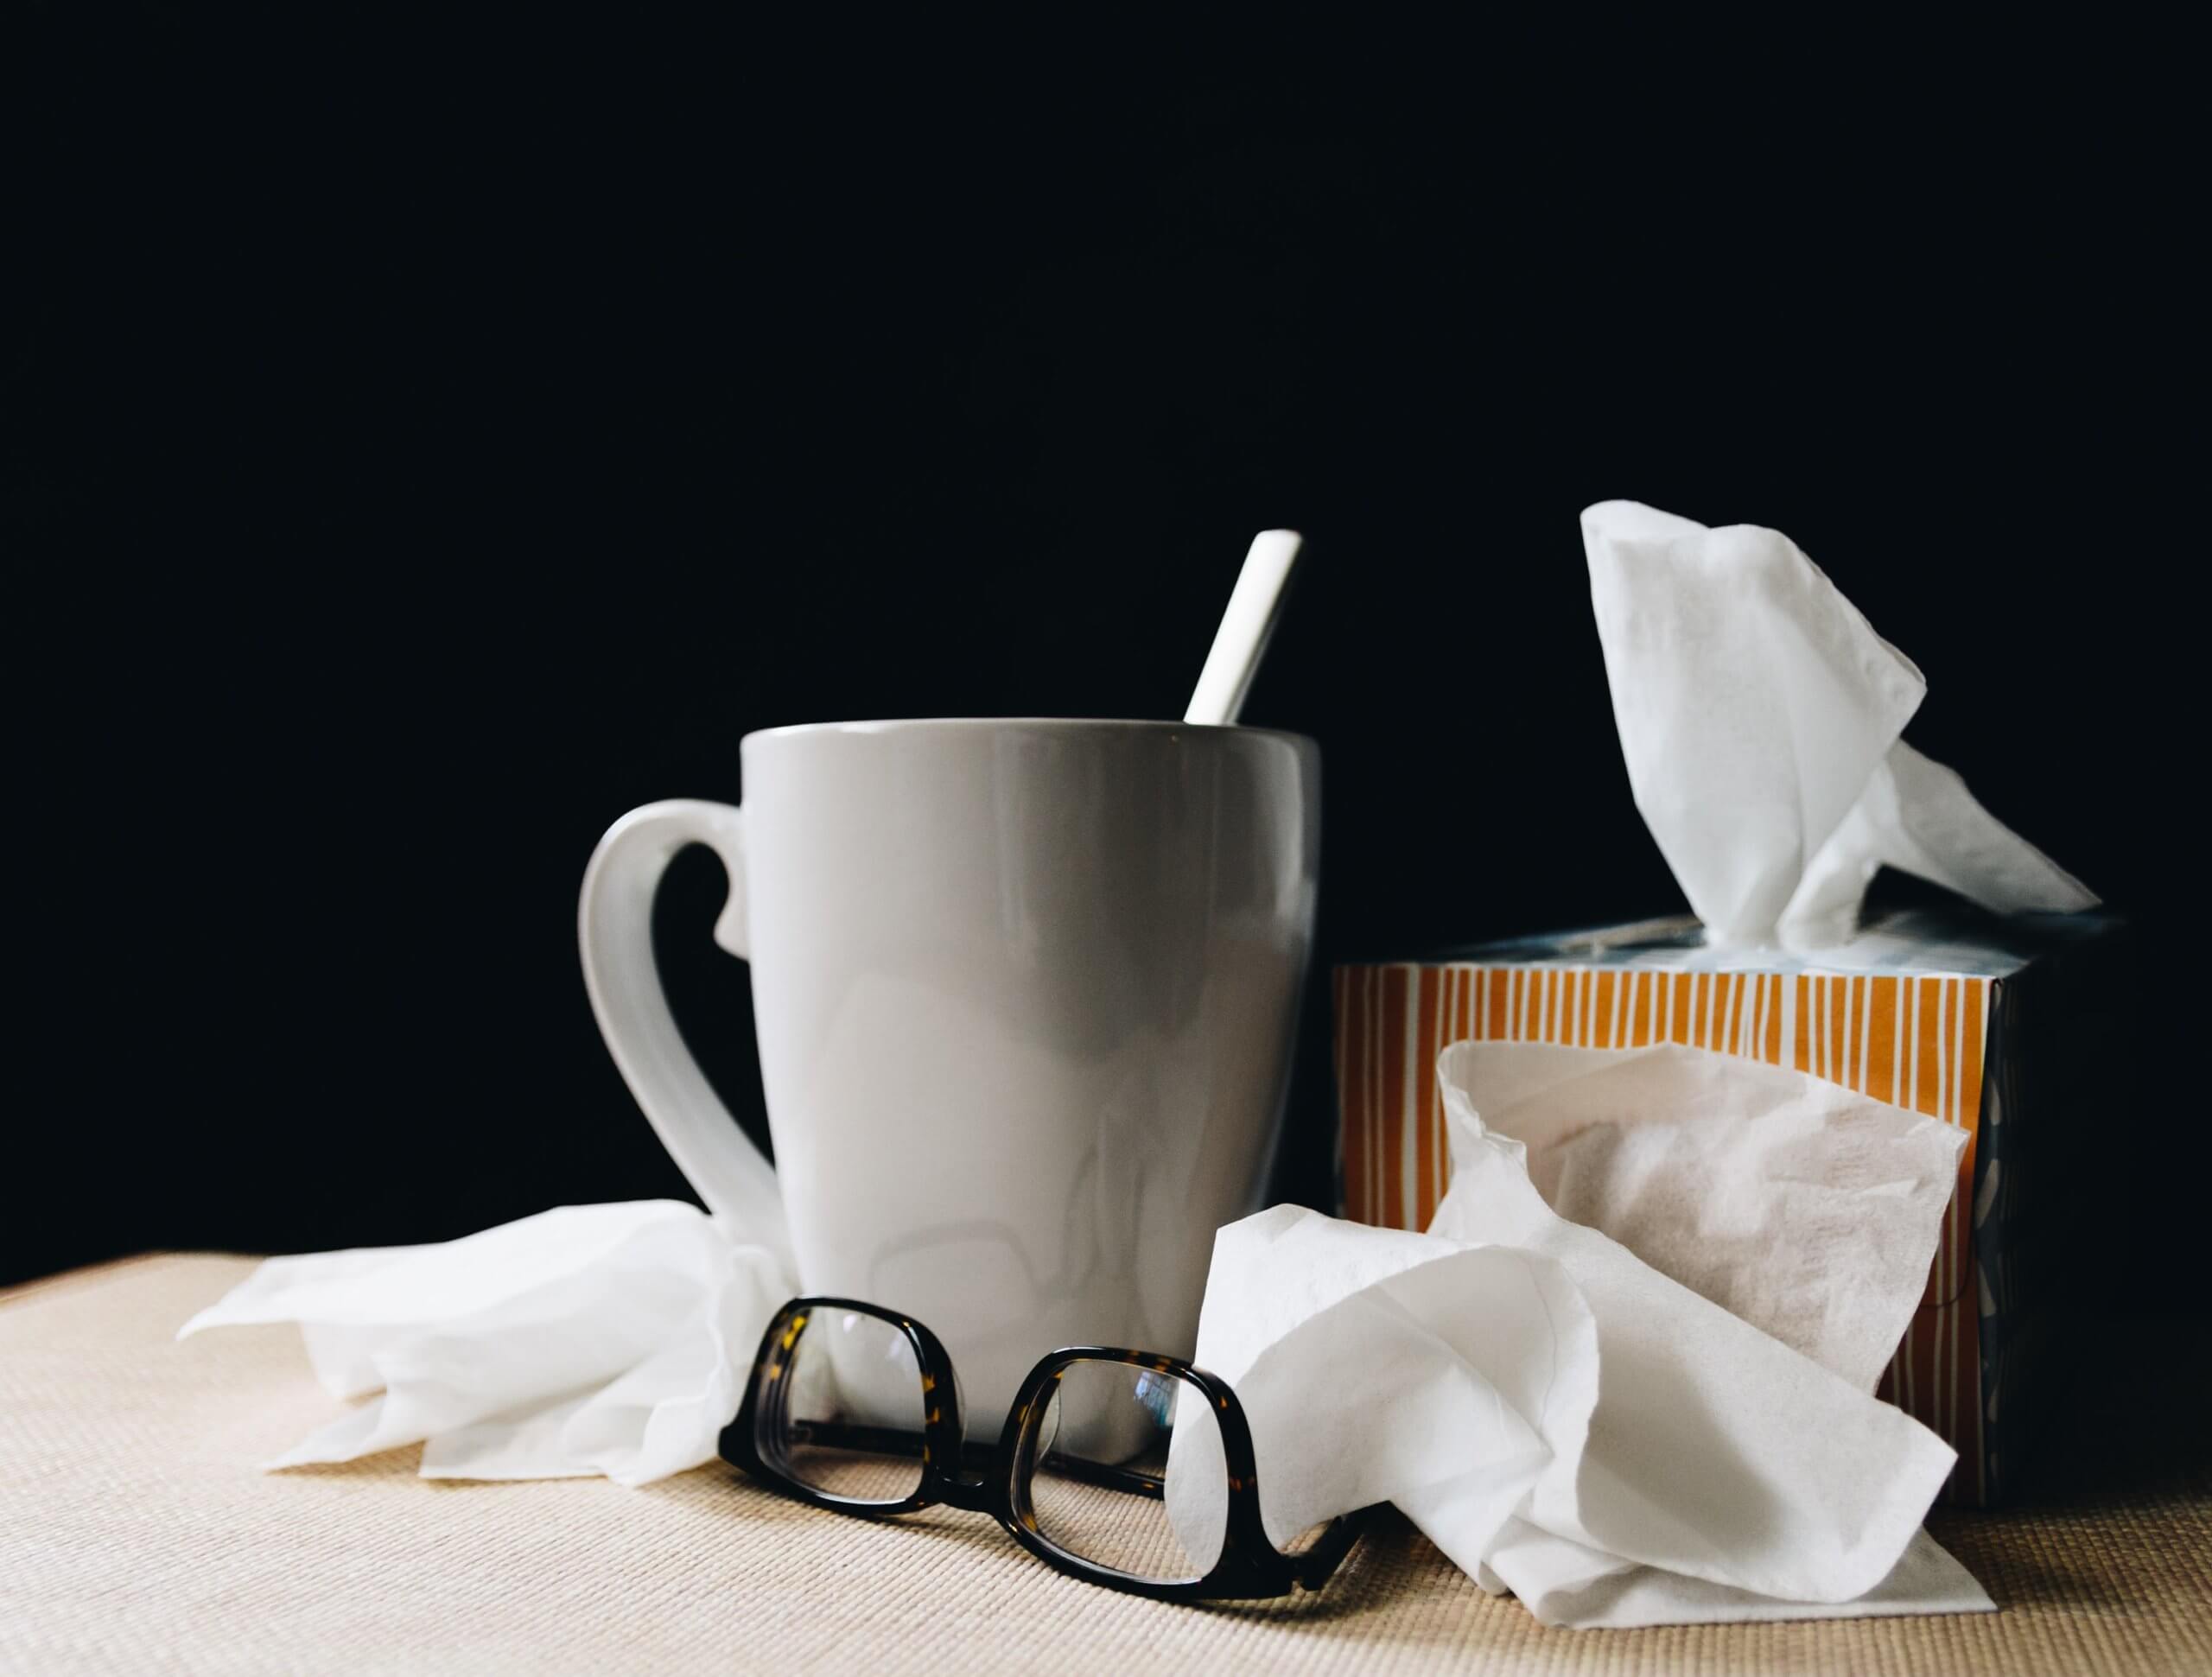 tissues, cup of tea and glasses